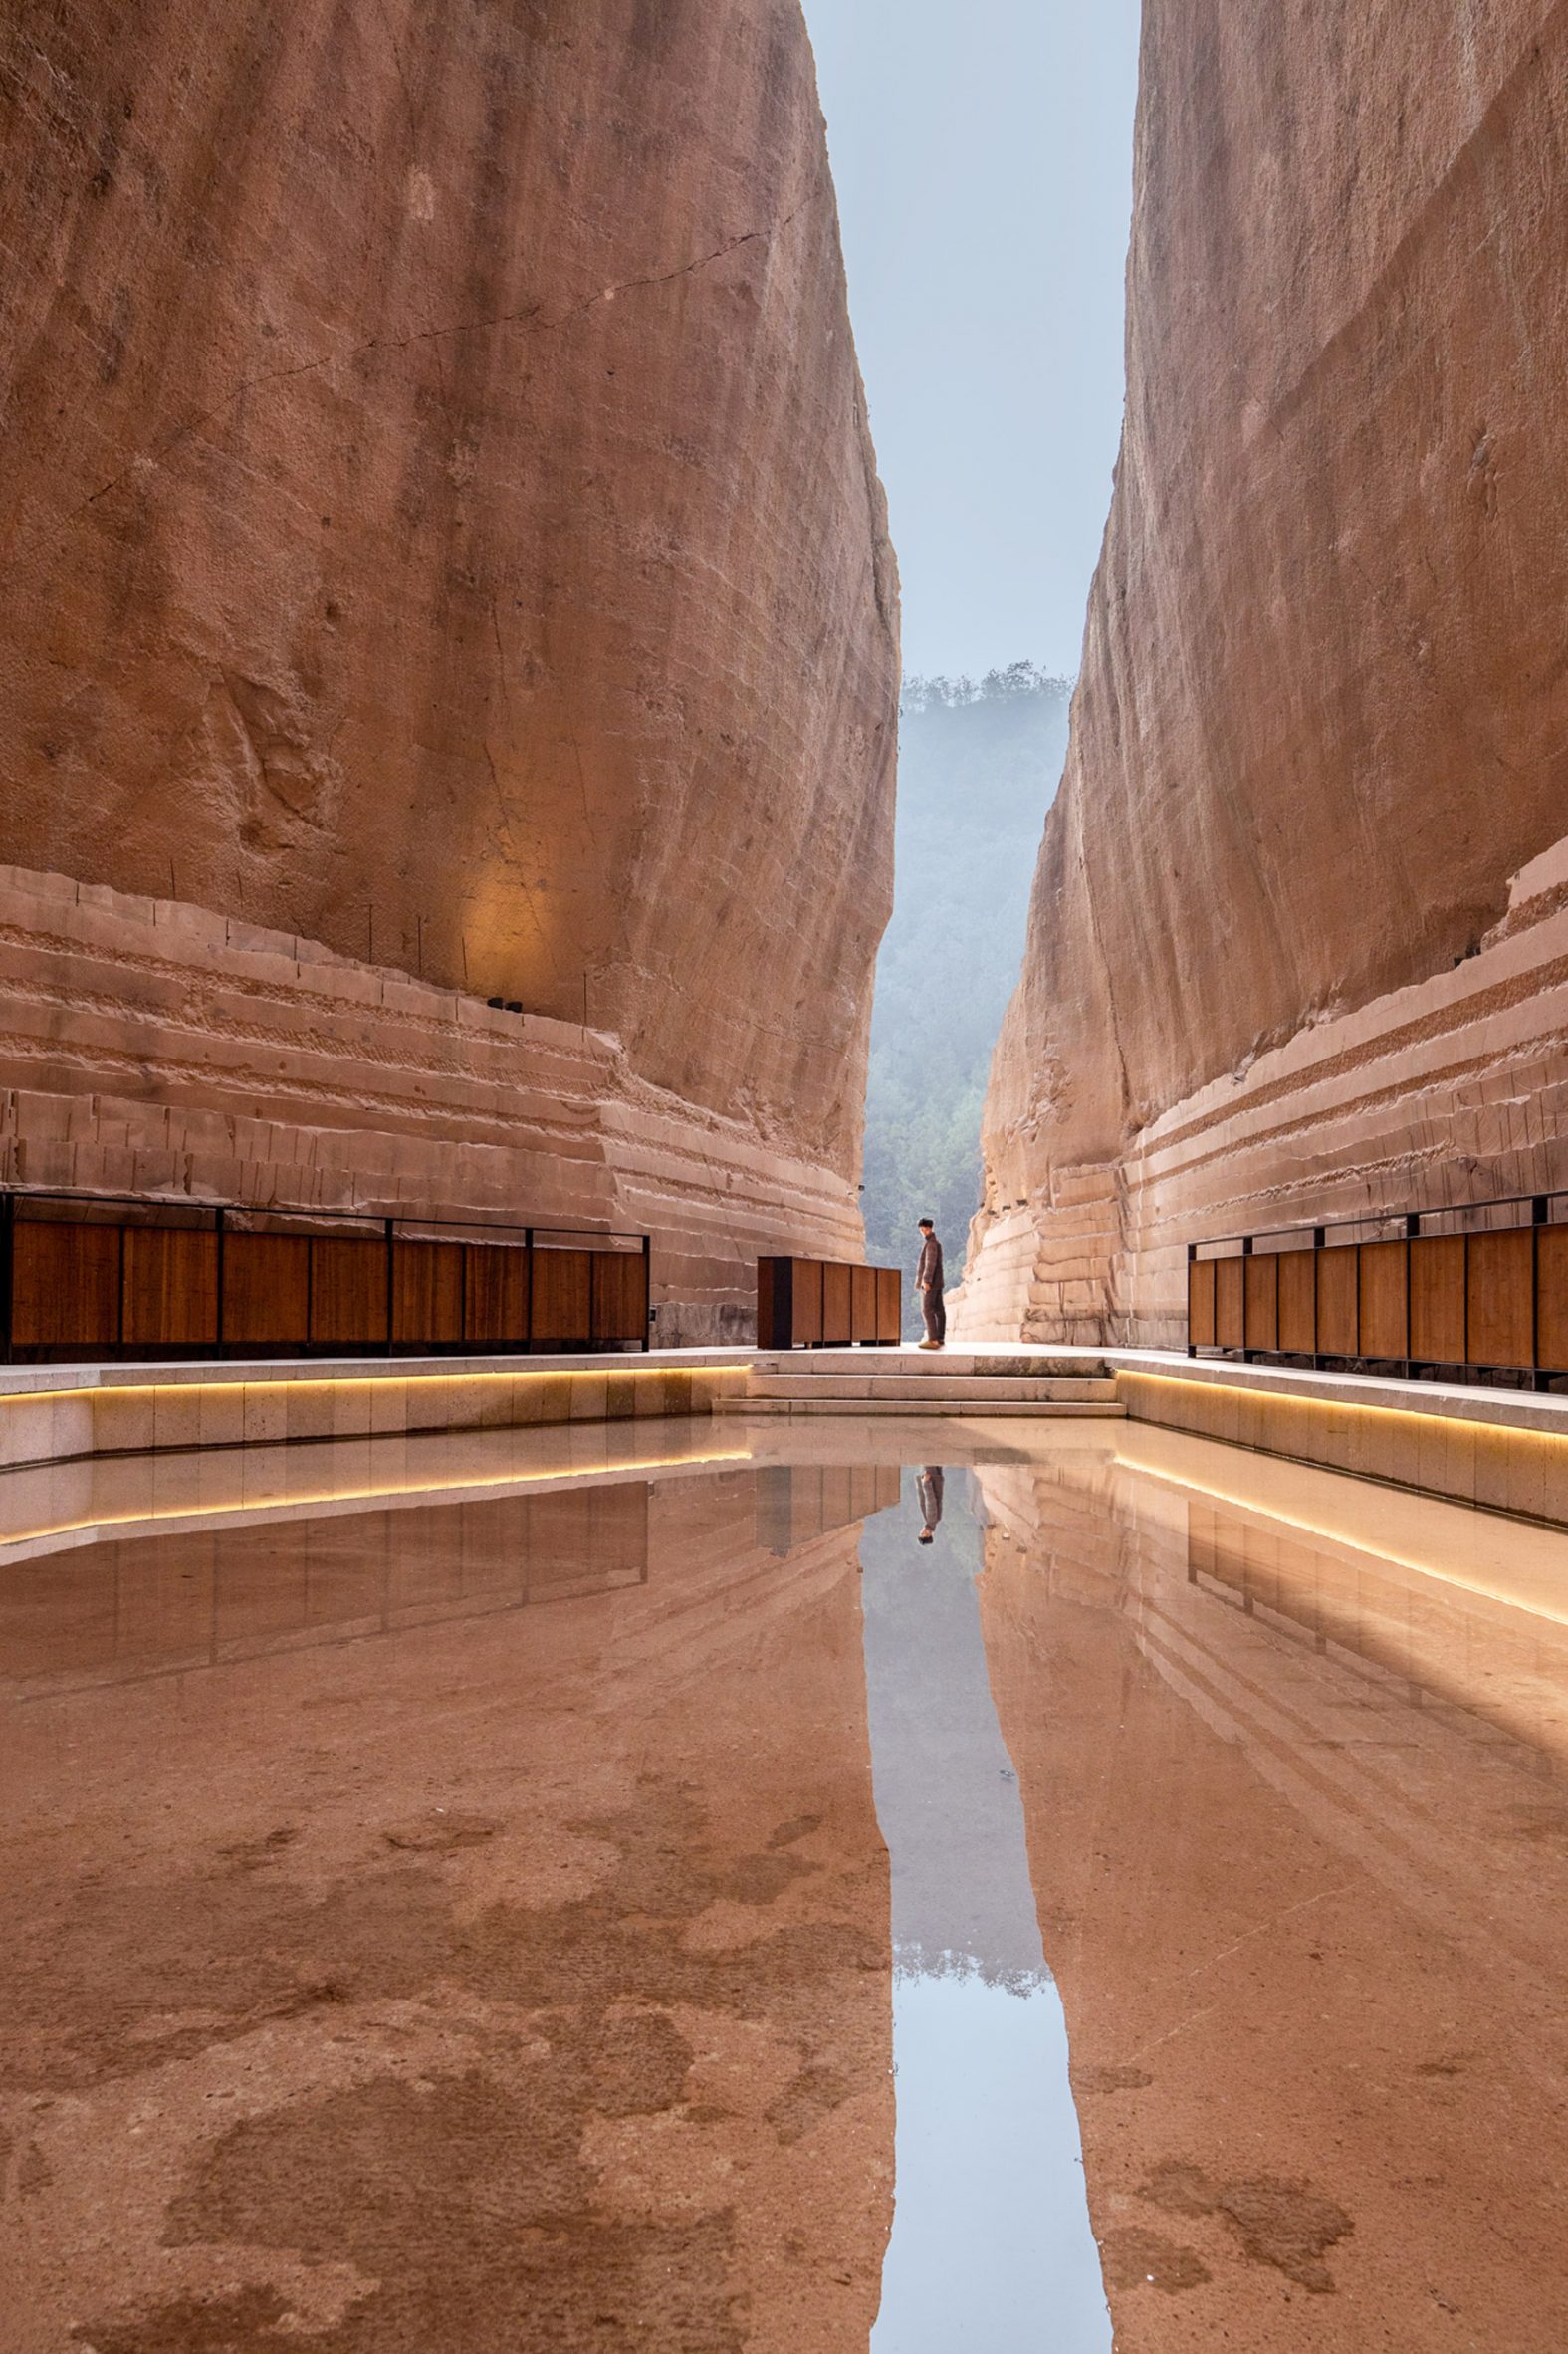 DnA_Design and Architecture has transformed a series of stone quarries into cultural spaces